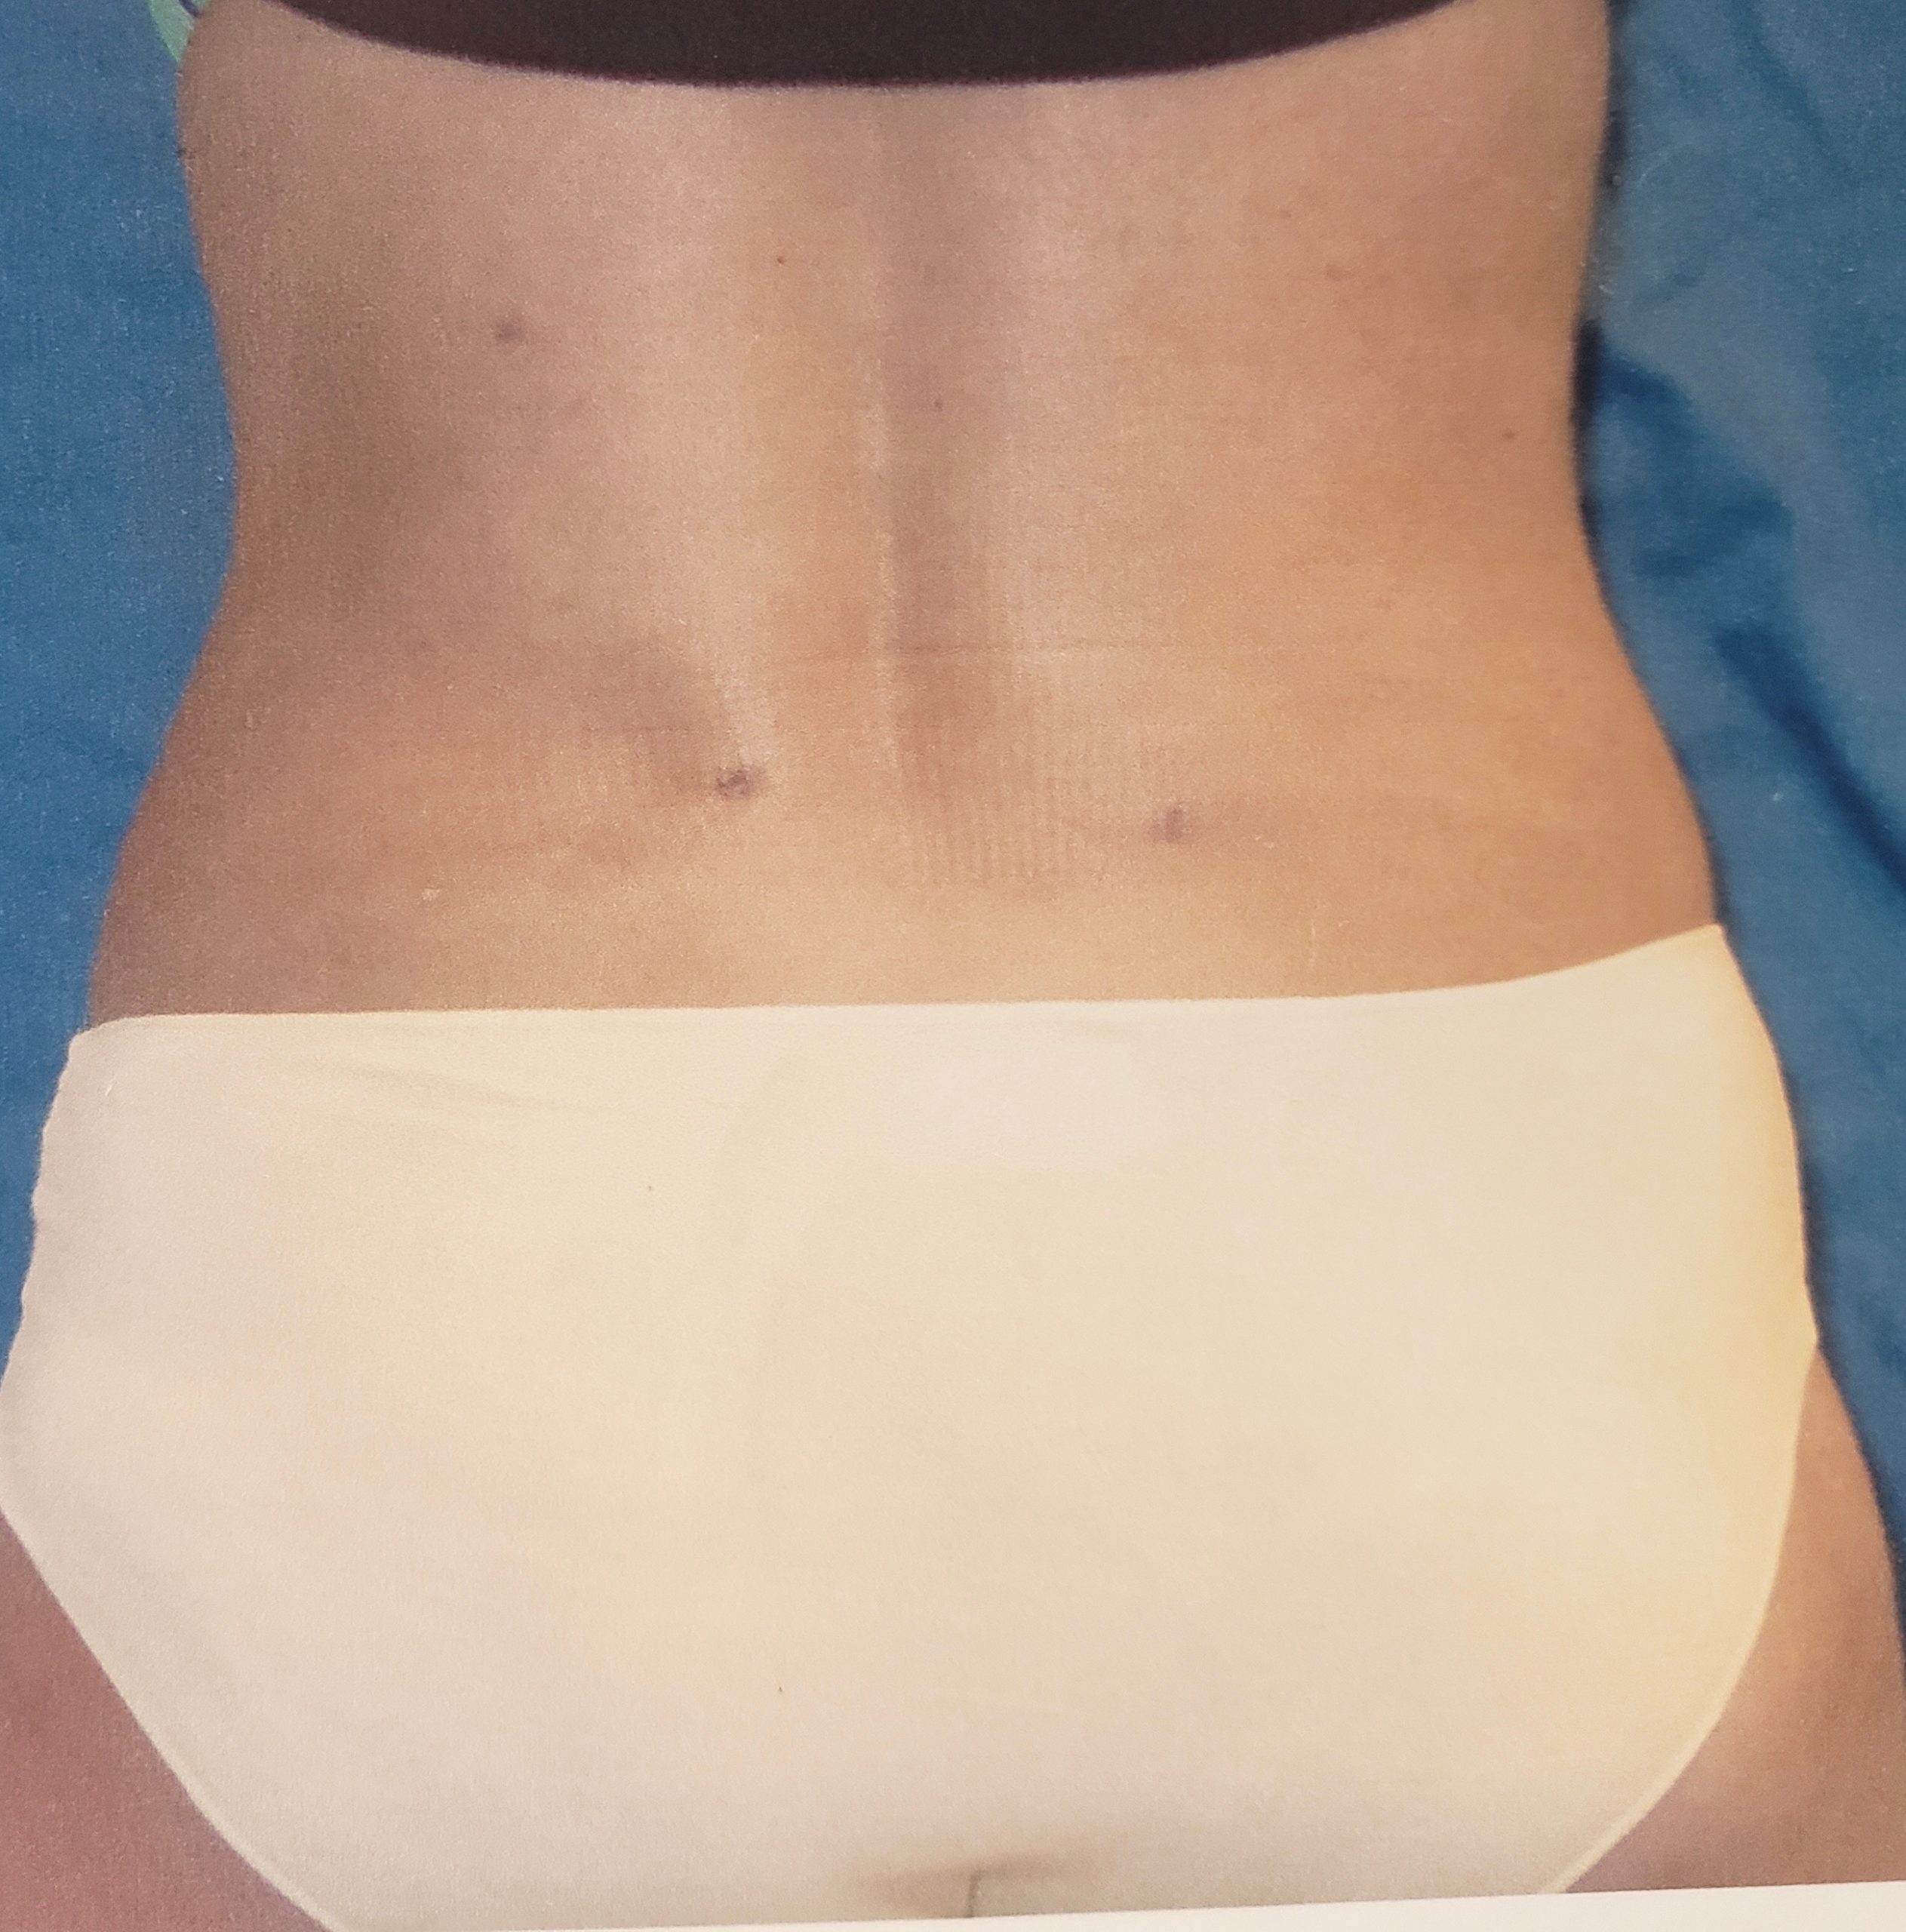 Liposuction Abdomen Treatment Before & After Gallery in New Bern, NC